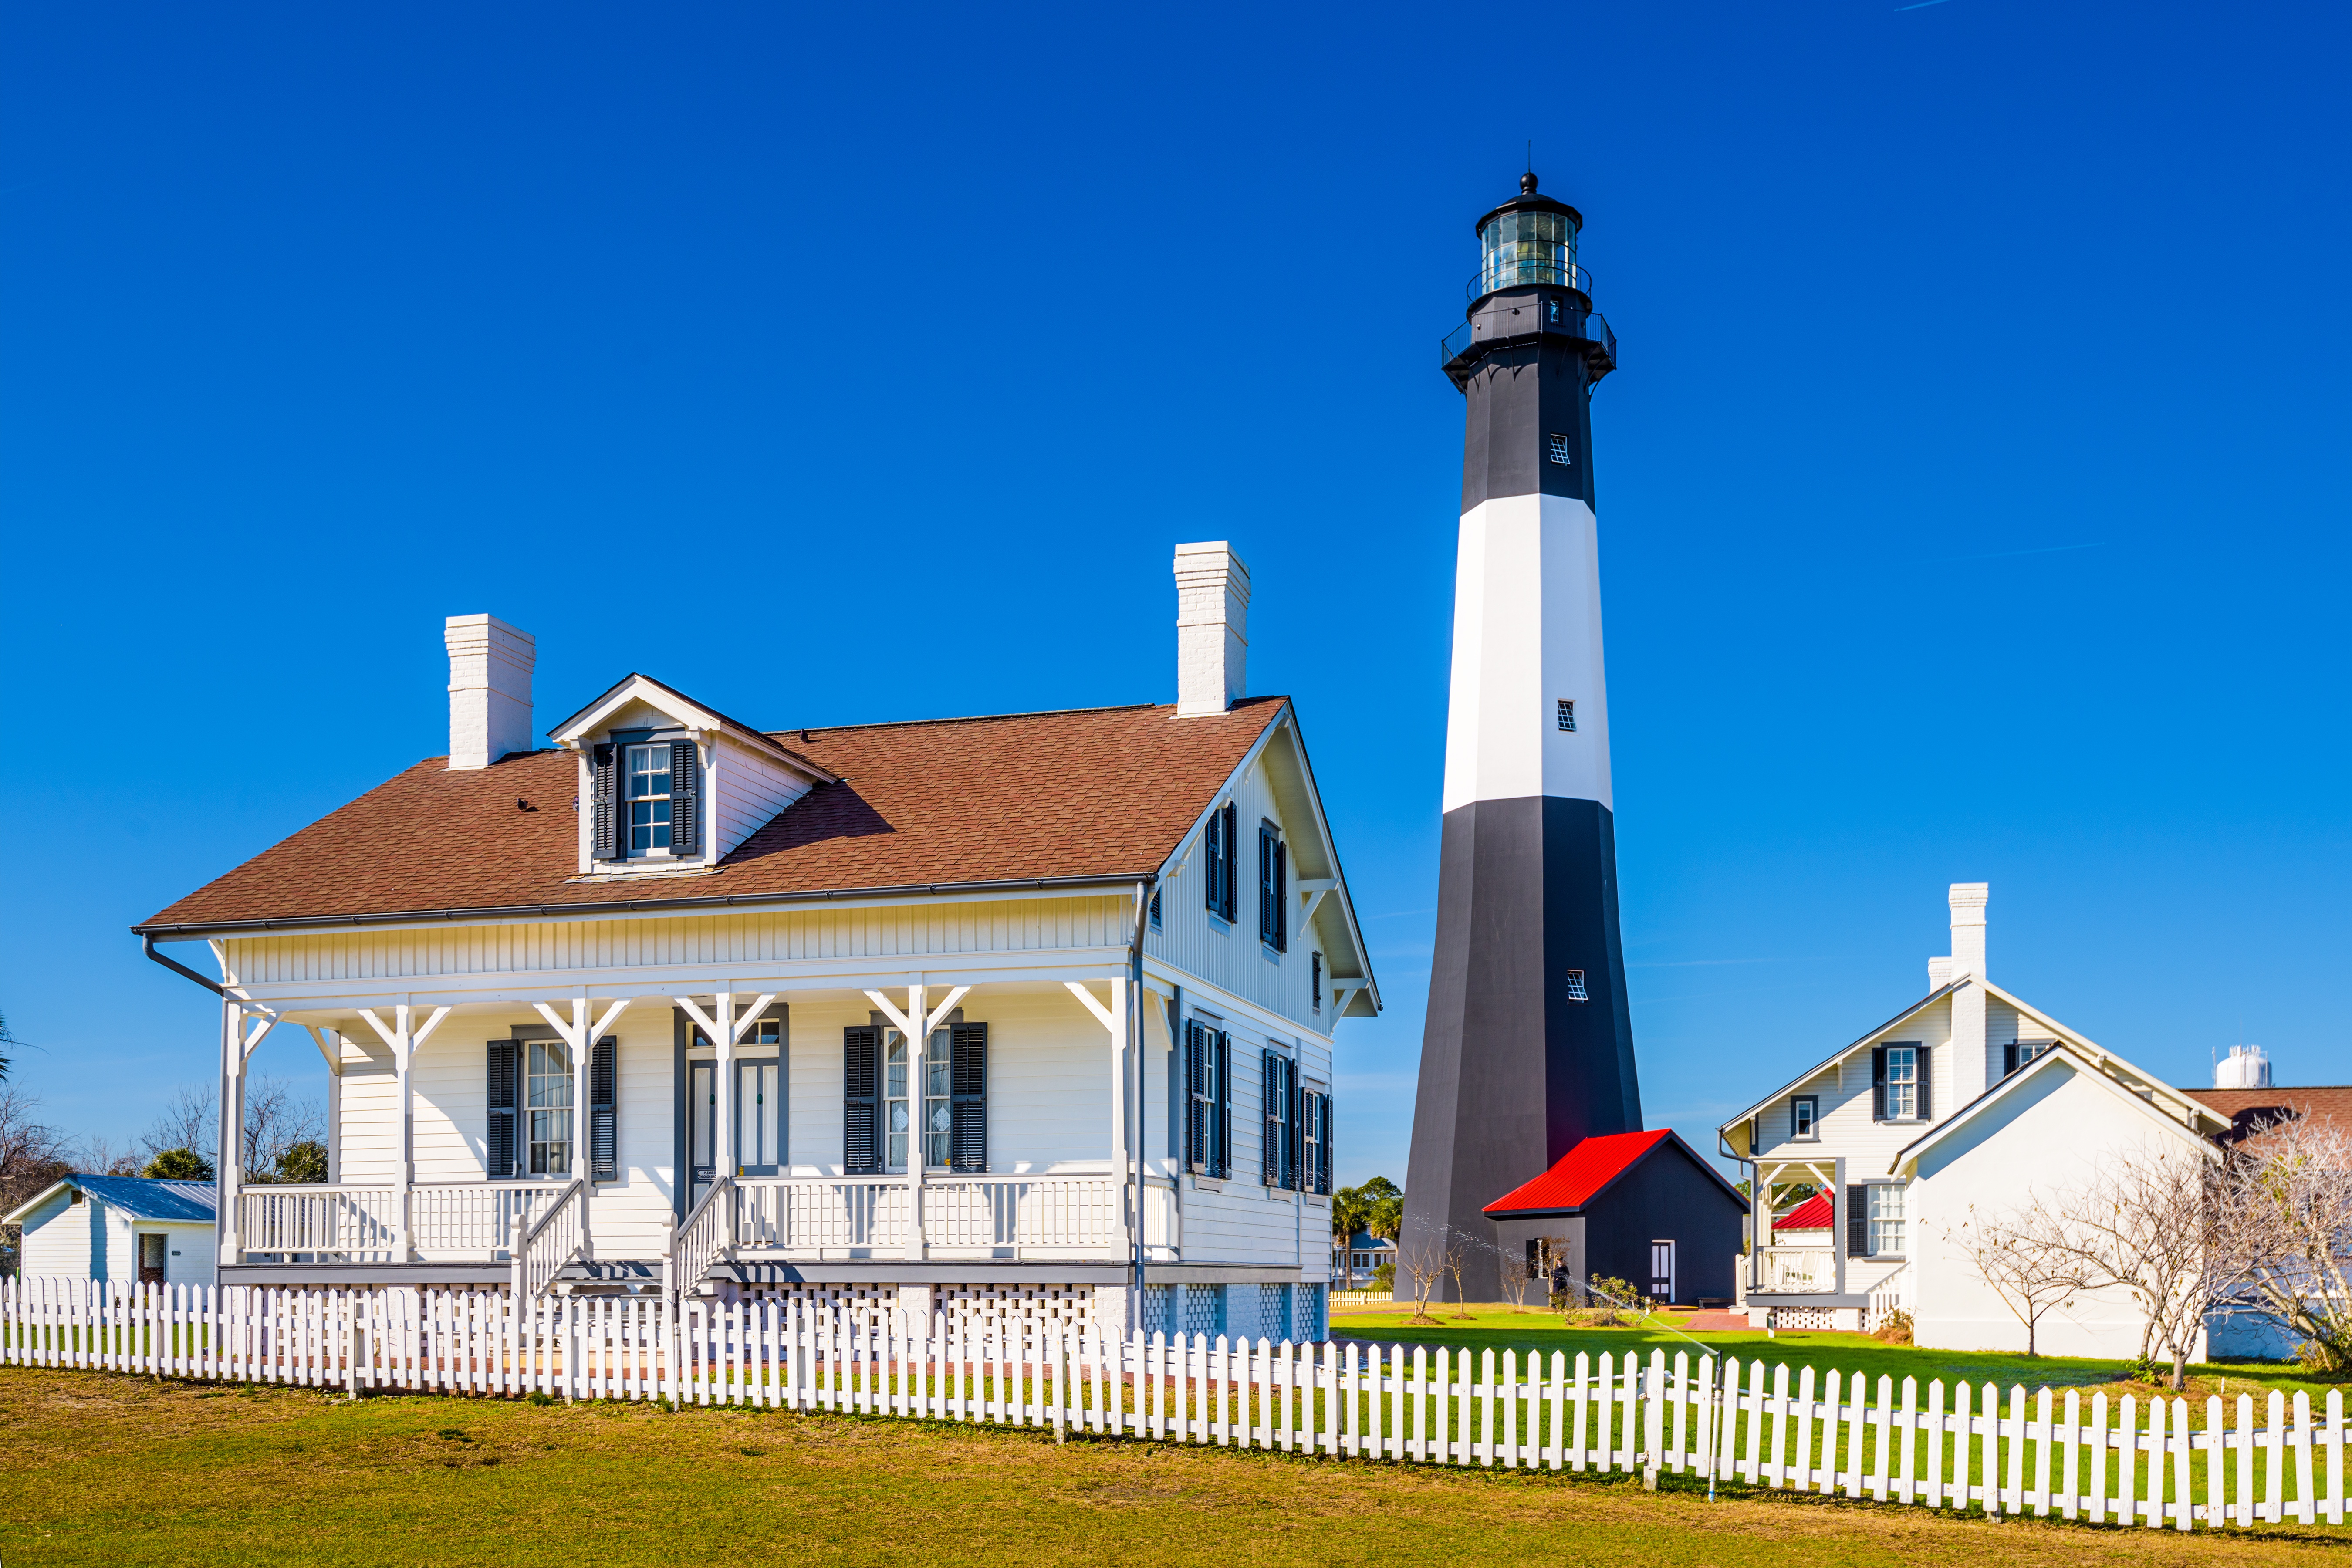 Tybee Island Lighthouse is a popular attraction near Savannah, Georgia for RV snowbirds traveling down I-95 to Florida